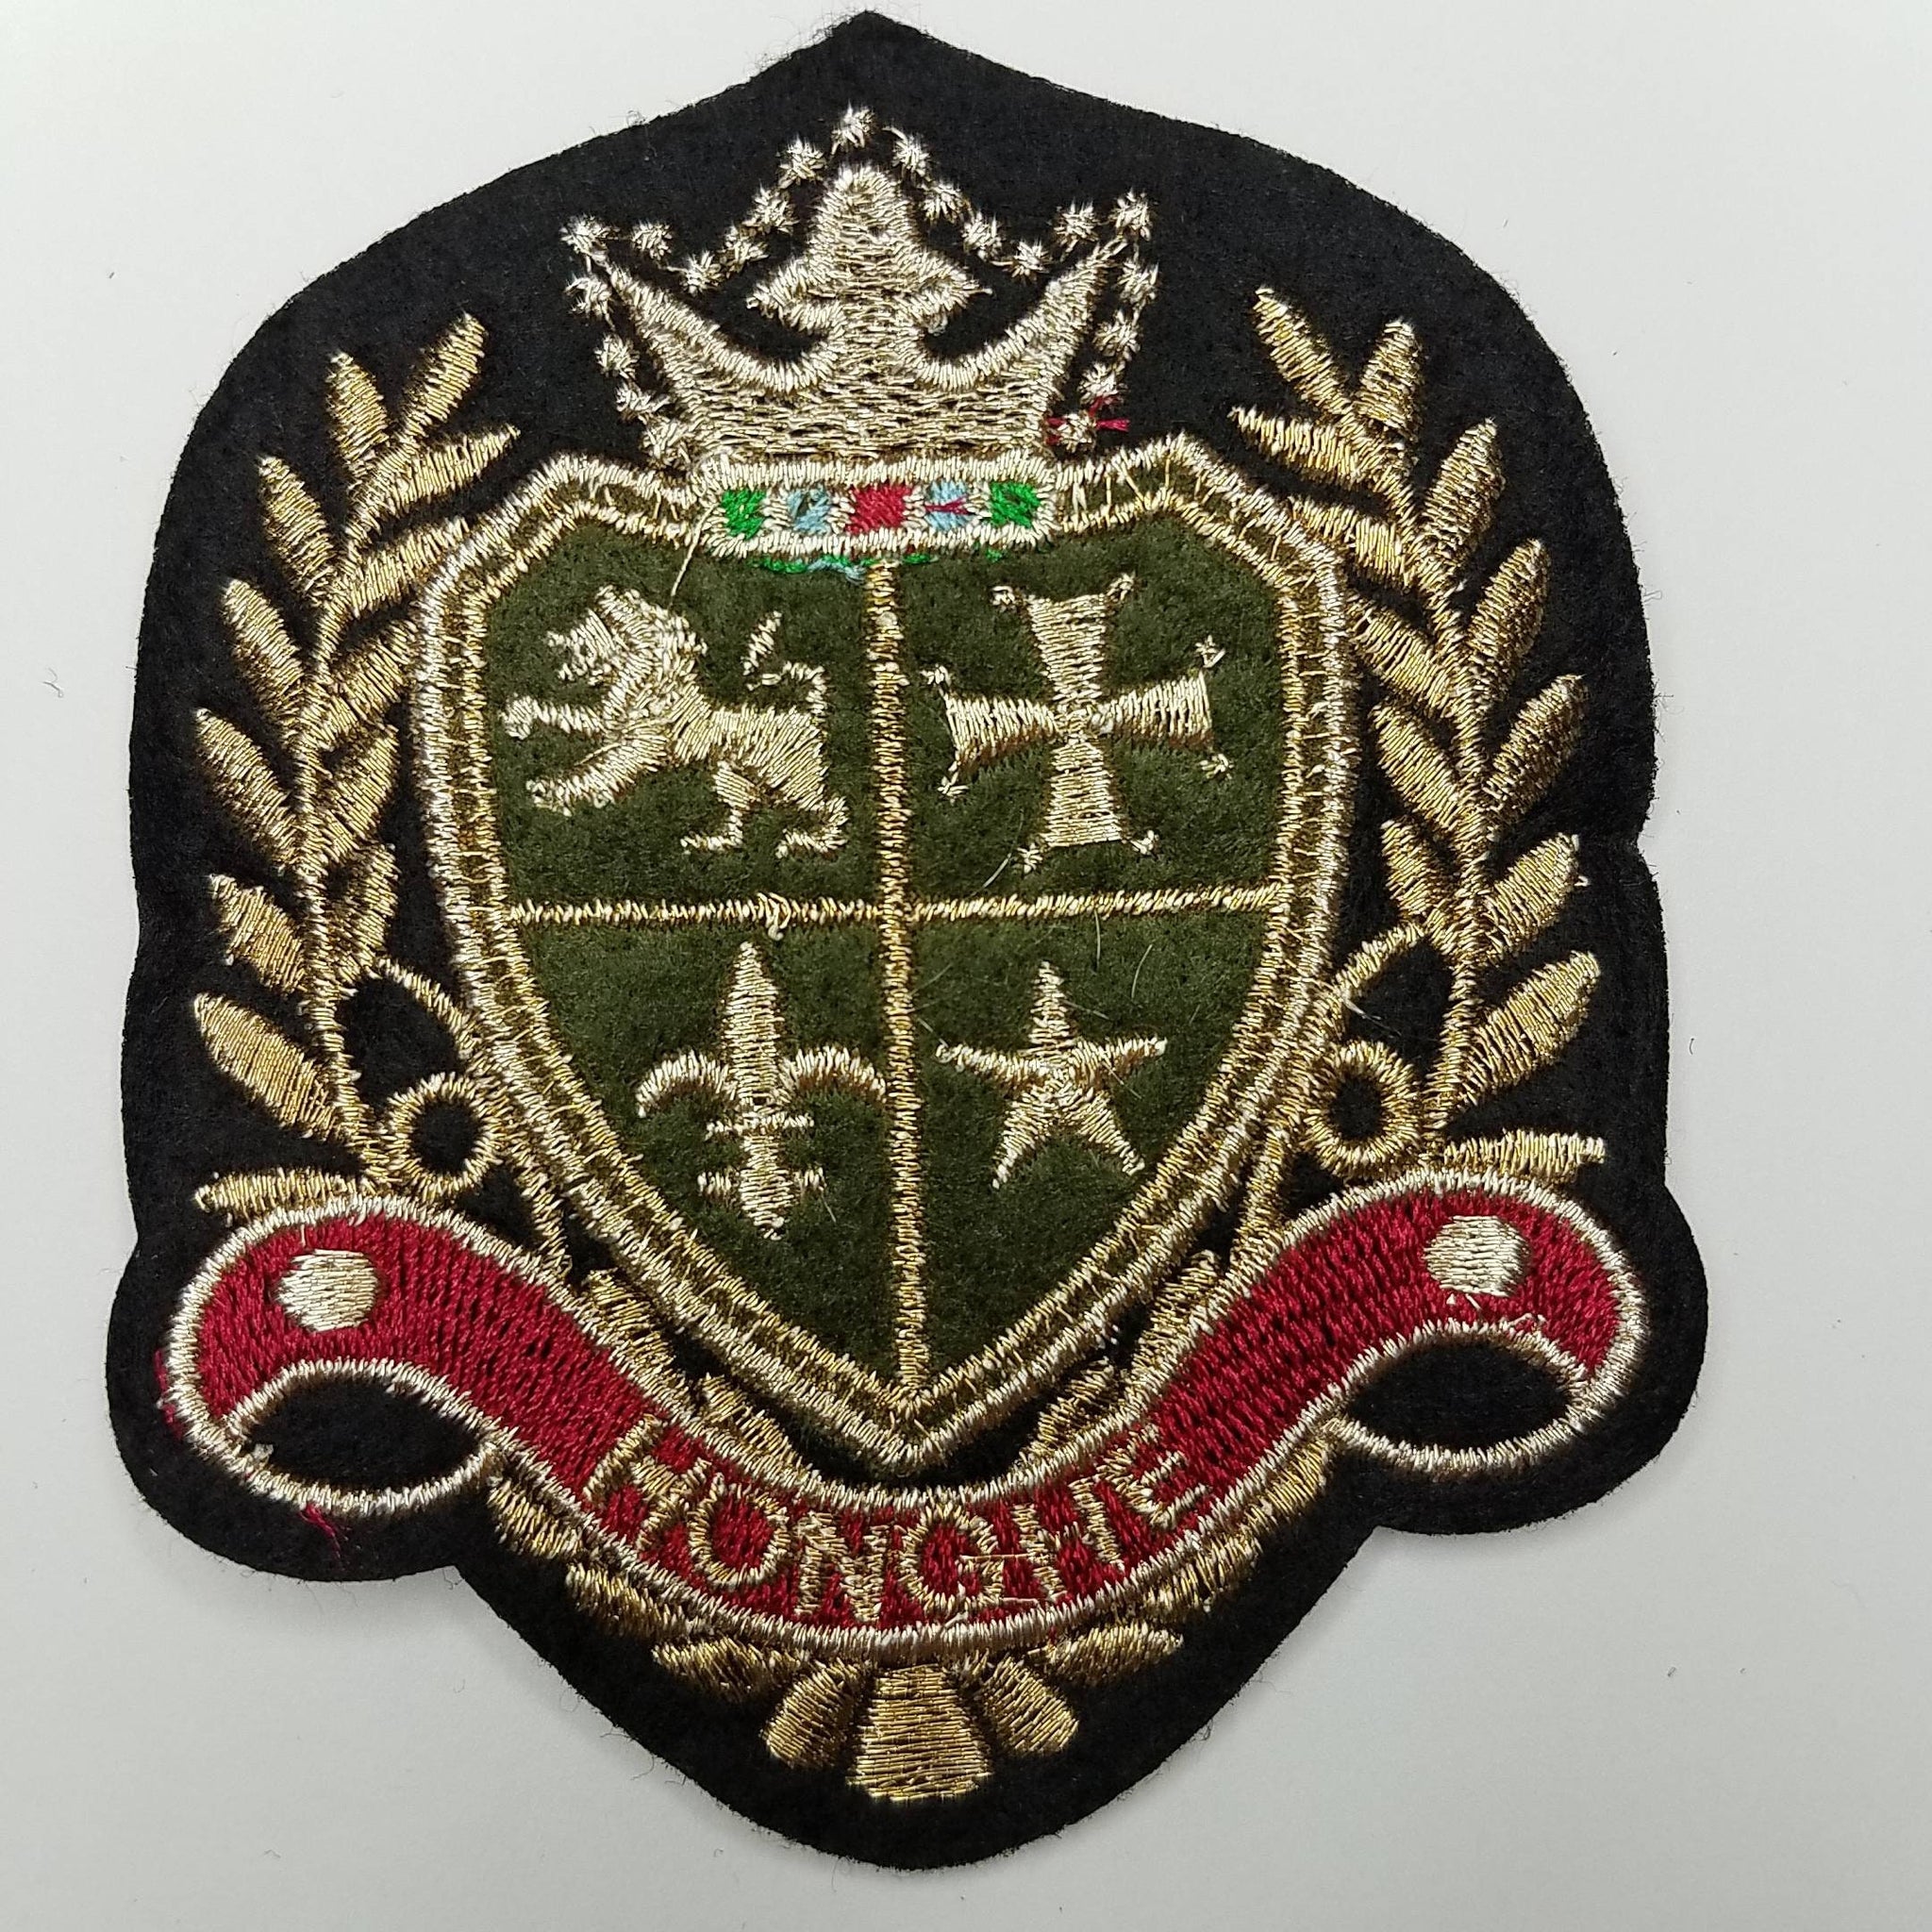 2-pc Set, Royalty Crest, Gold Metallic, Green, and Black Emblem patch, DIY, Embroidered Applique Iron On Patch, Size 3.5"